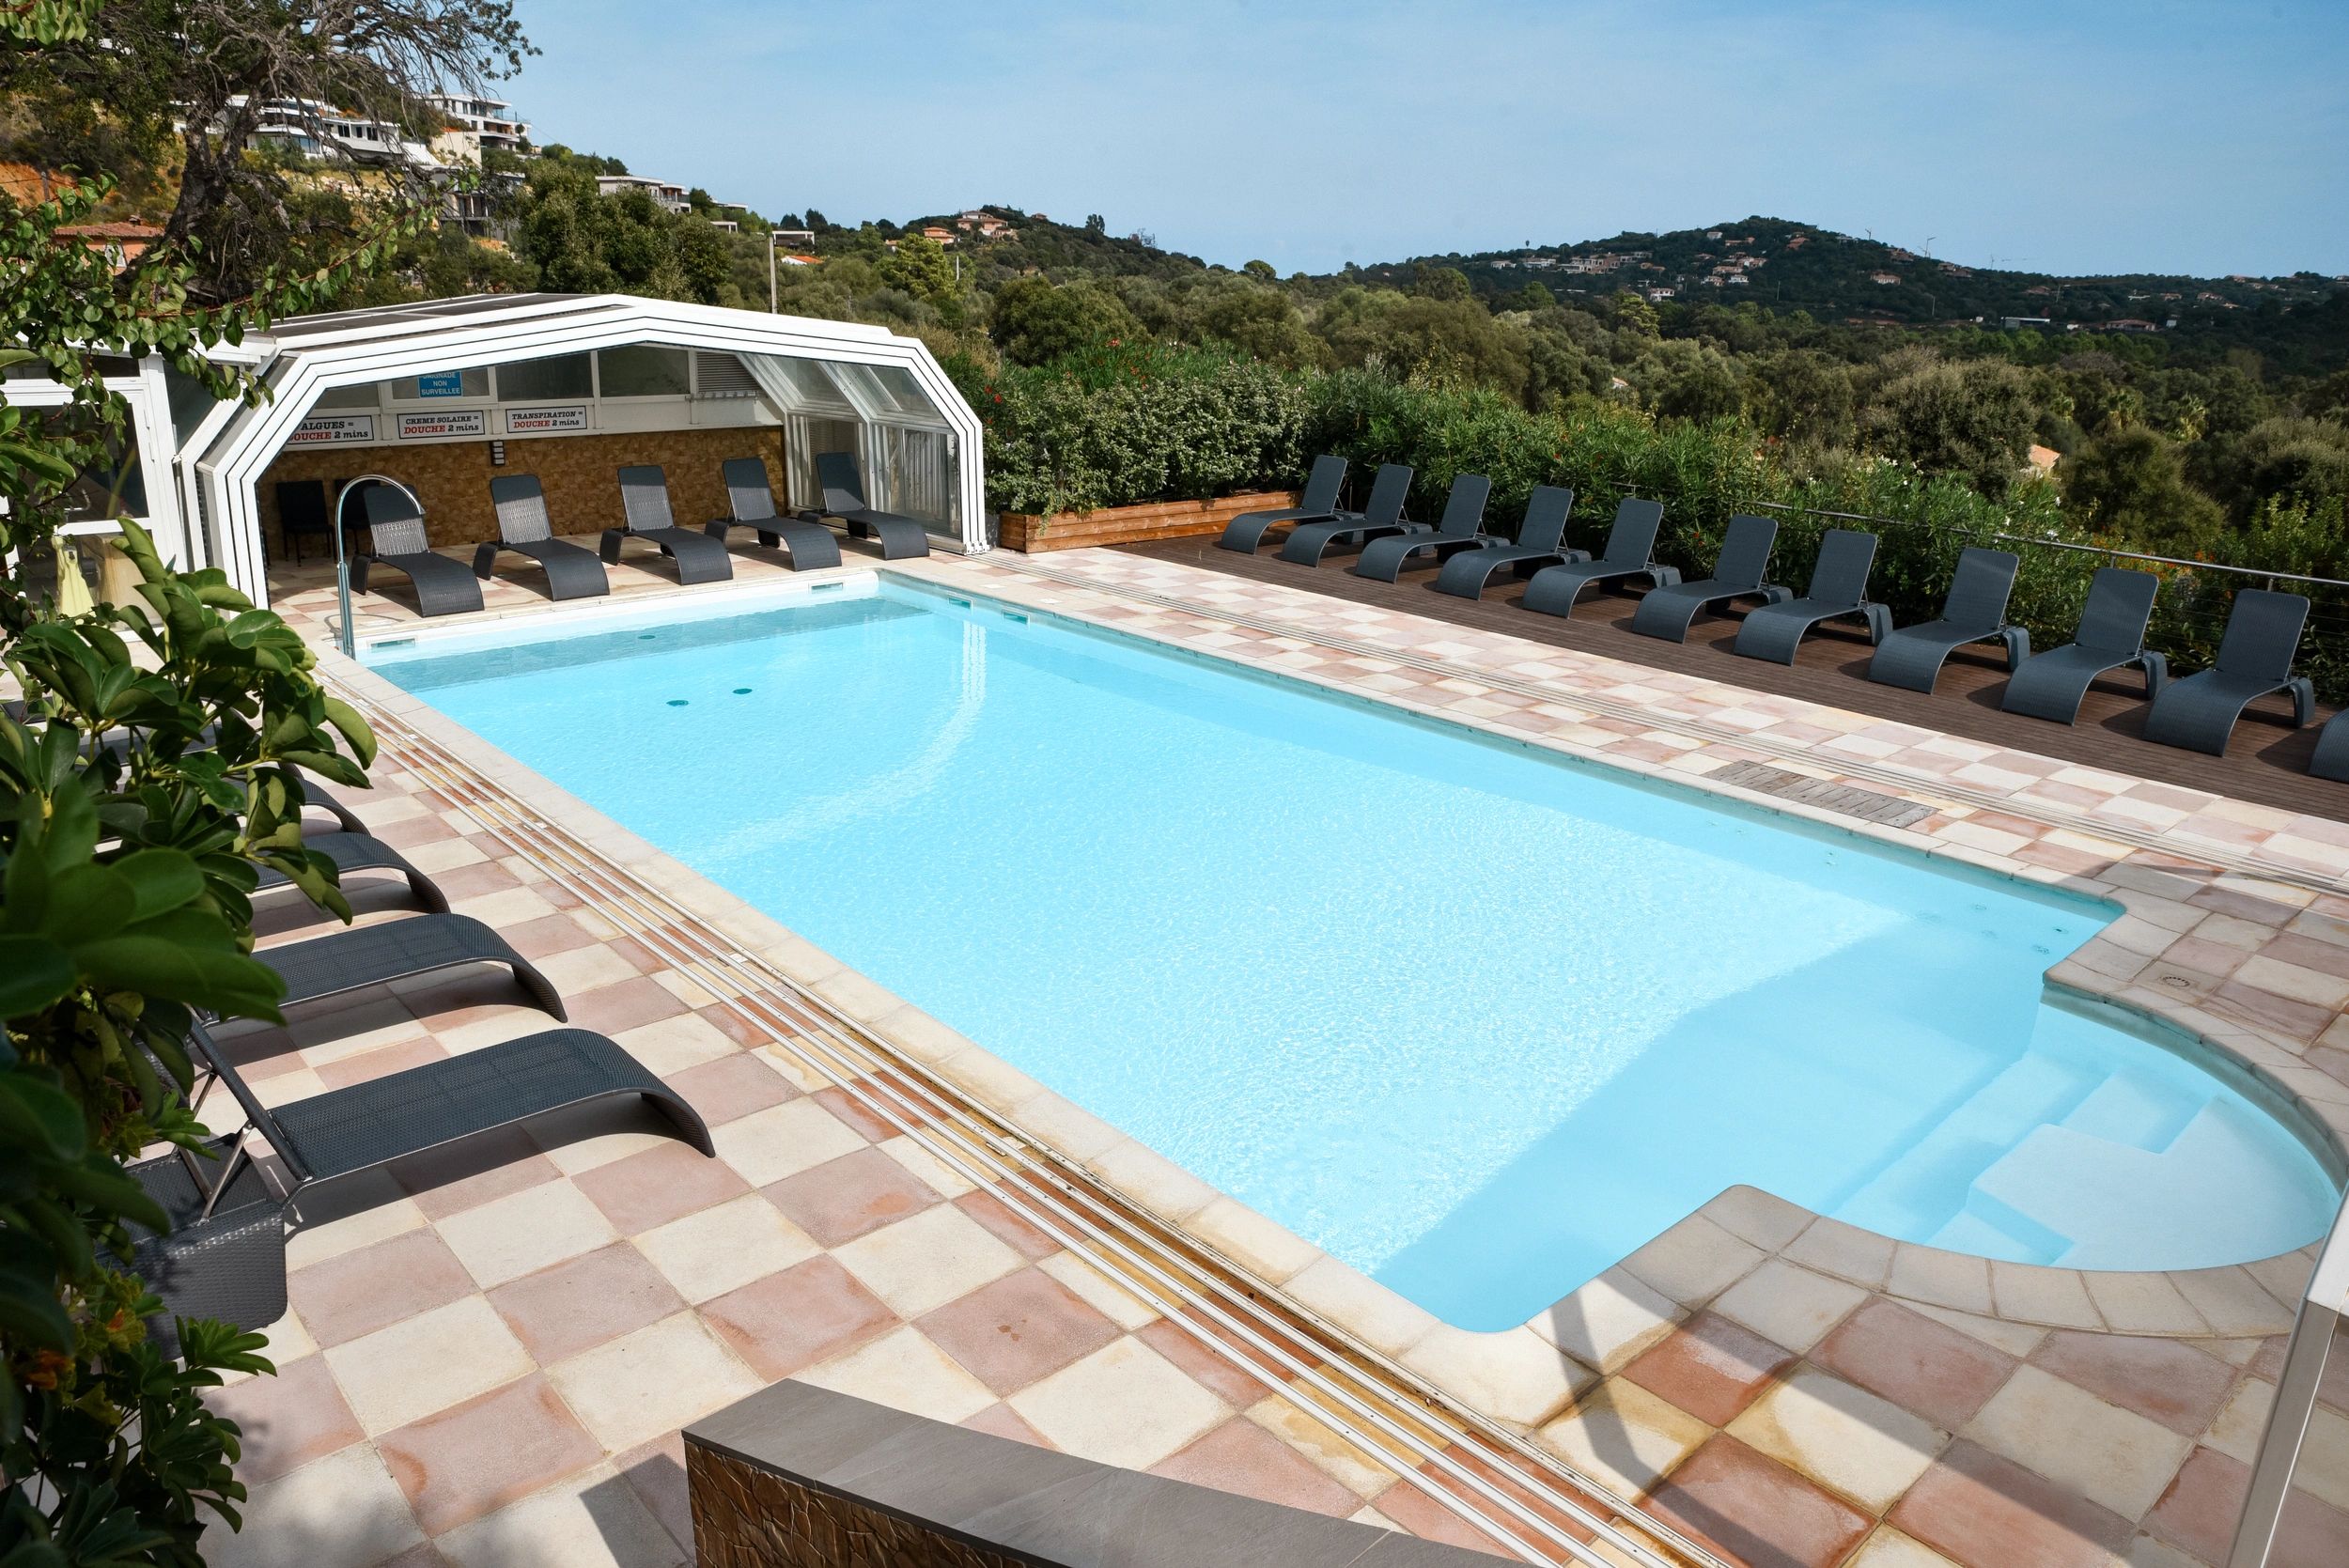 The heated pool in the 4-star residence in Porto-Vecchio